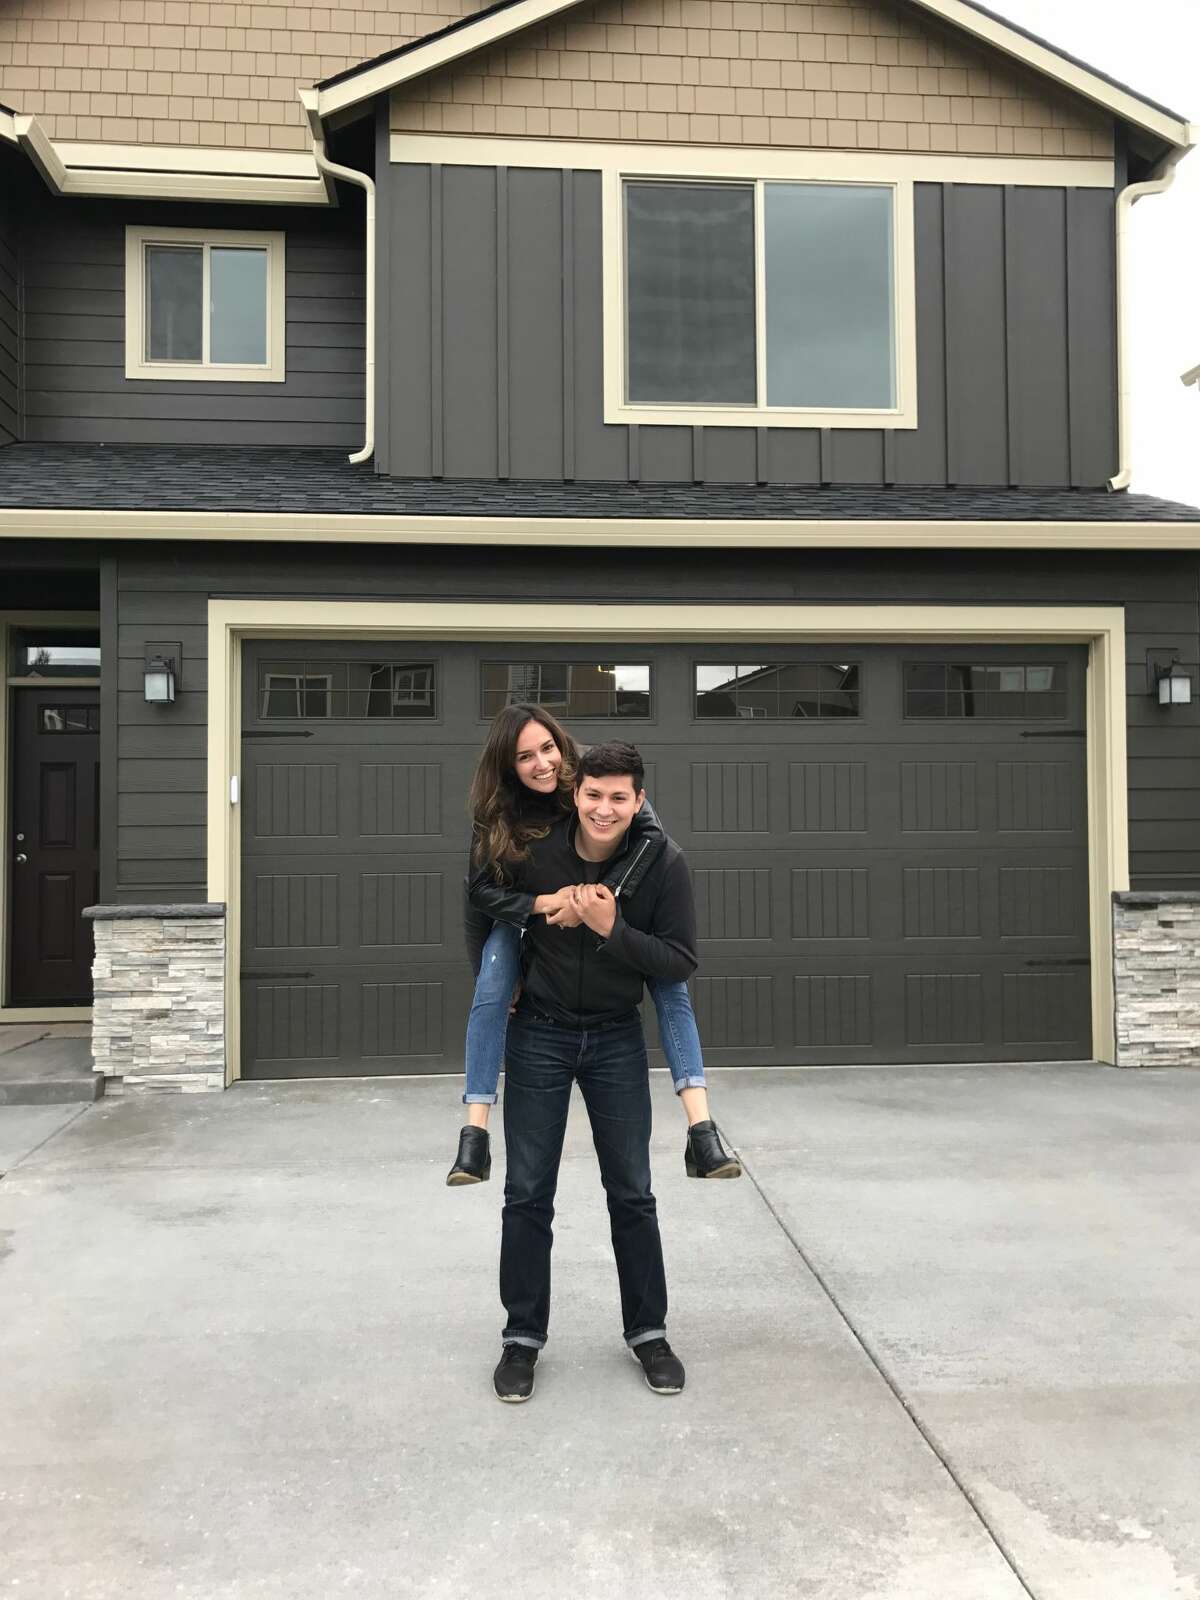 Nancy Fimbrez, 25, stands with her husband Stephen in front of the home they purchased in Vancouver, Wash., on the day they closed. "Usually people do not act surprised when we say we are from California," said Nancy. While the couple has seen some anti-Californian graffiti, most of the people they've met in the Pacific Northwest have been friendly.